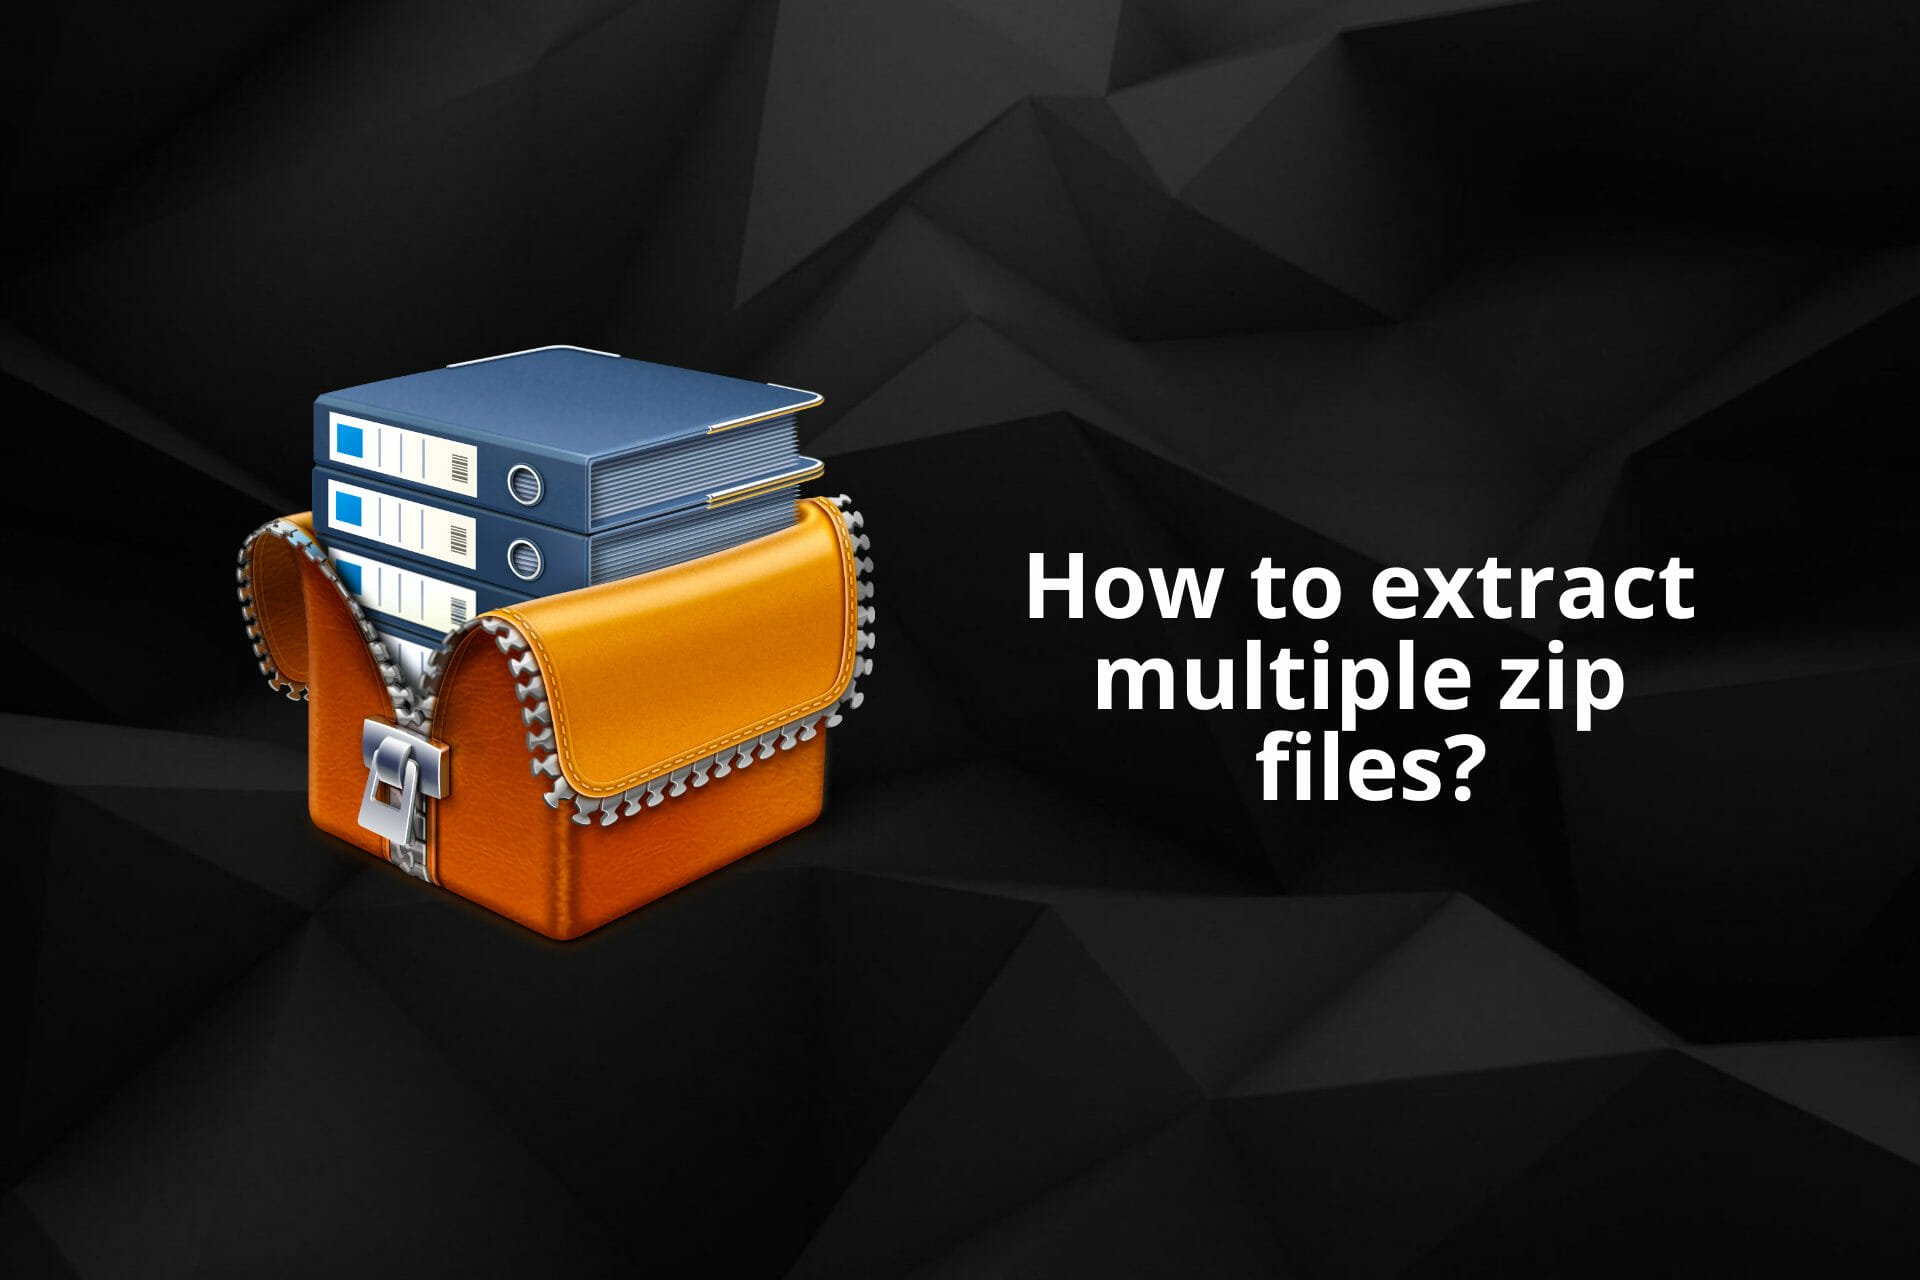 How can I extract multiple zip files